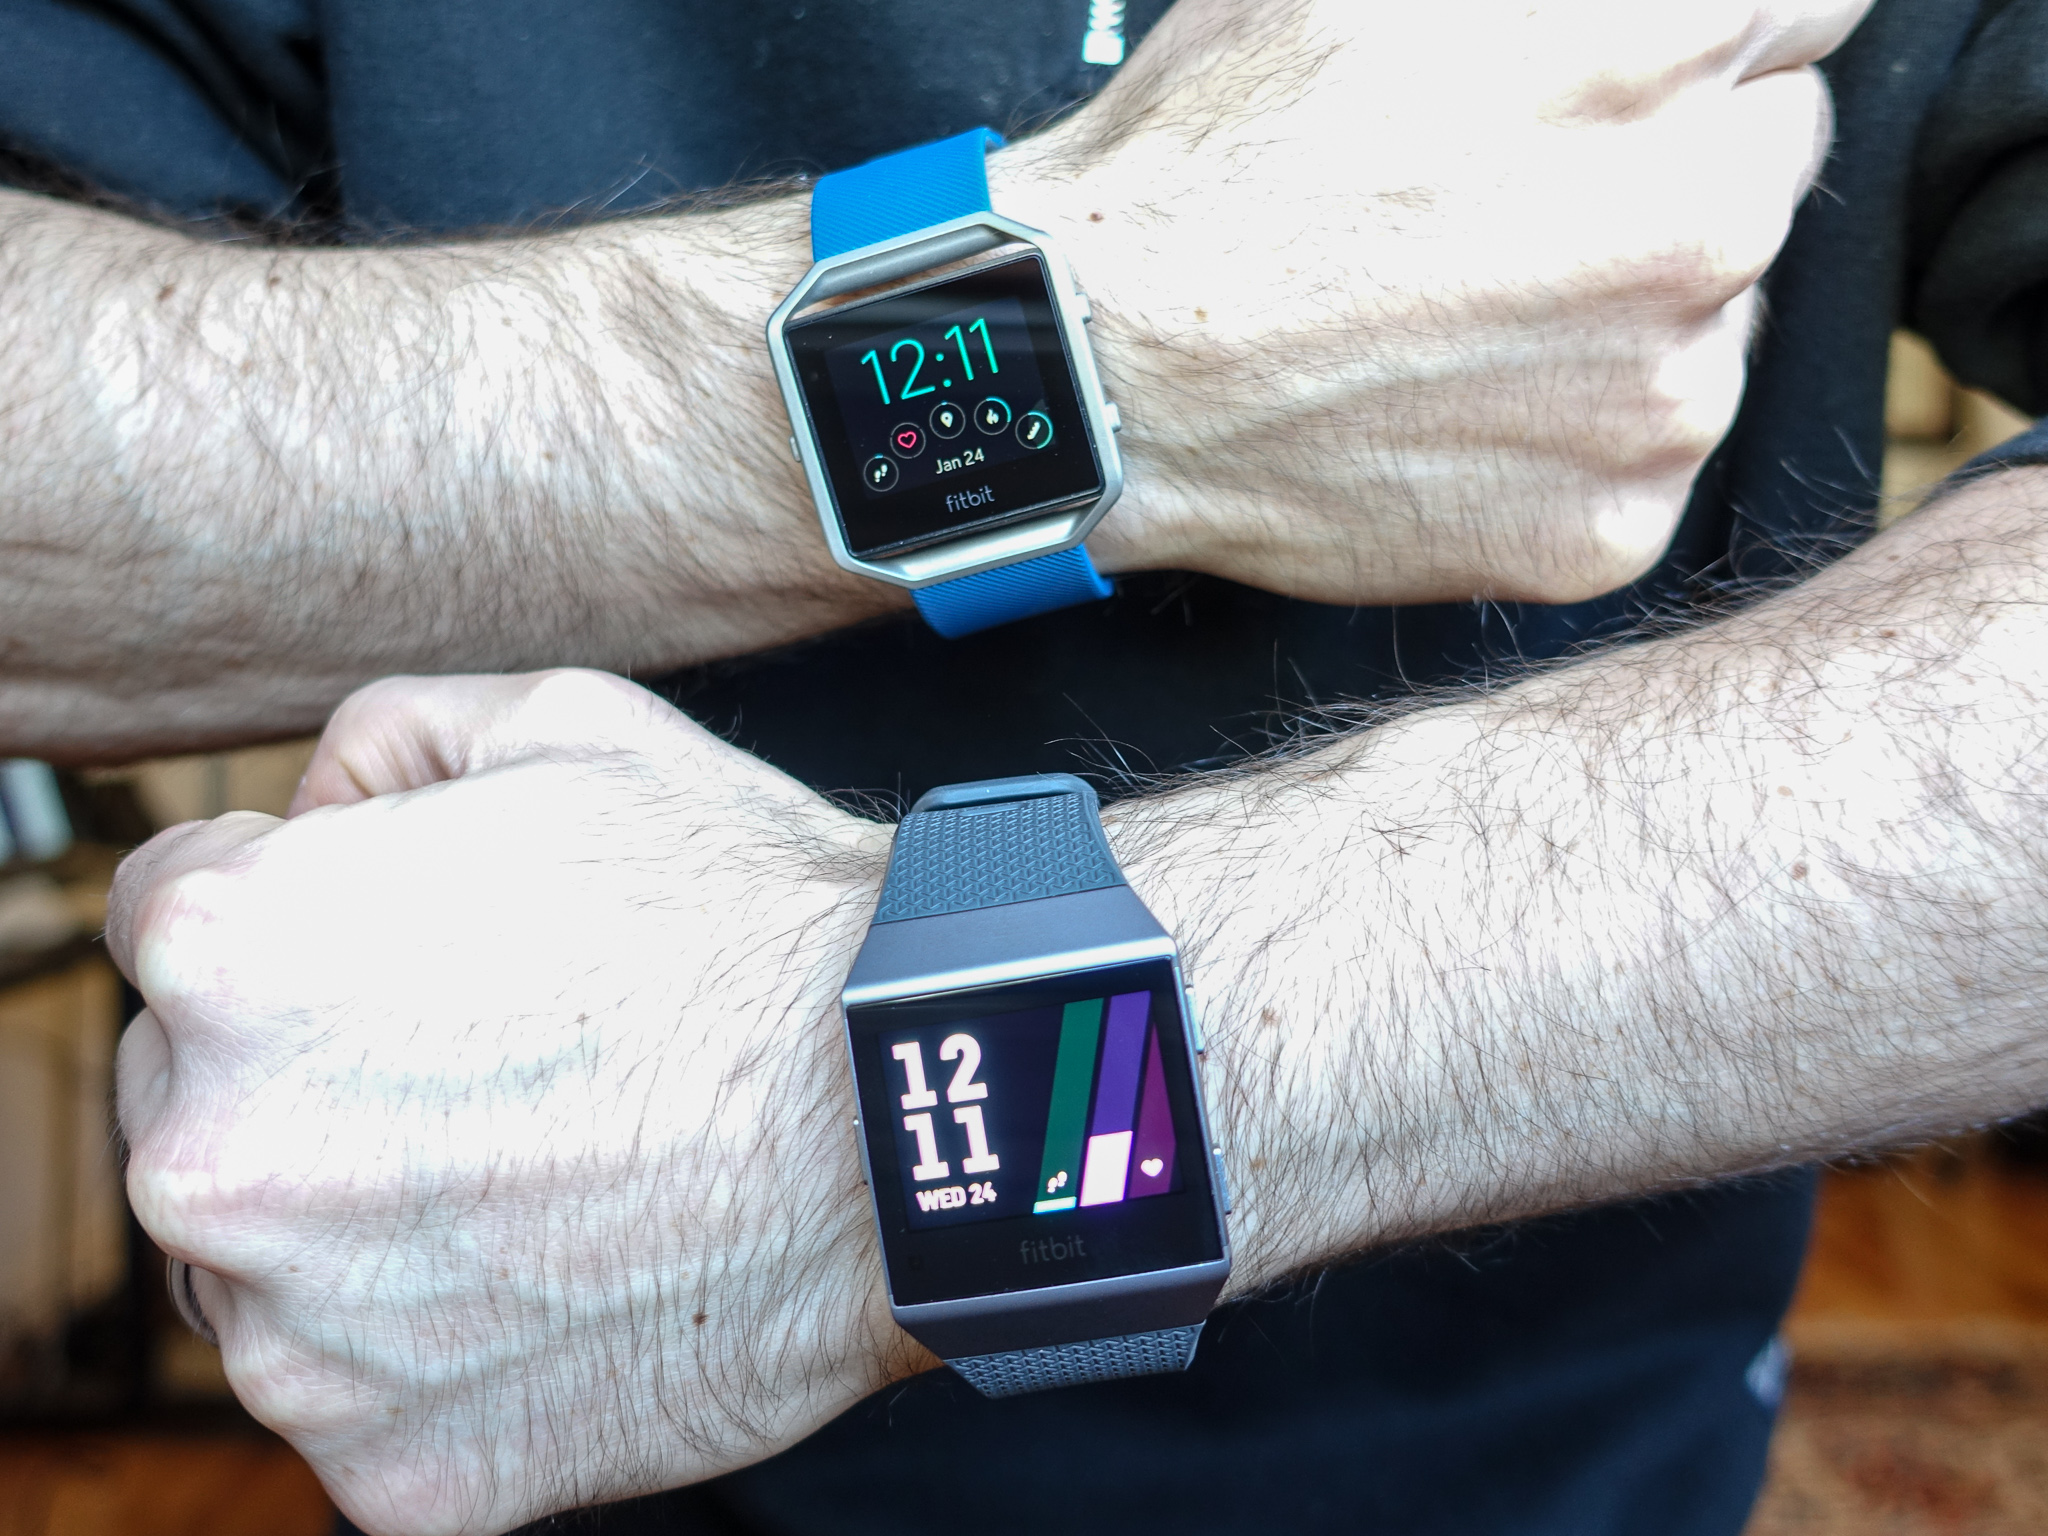 fitbit blaze showing wrong time